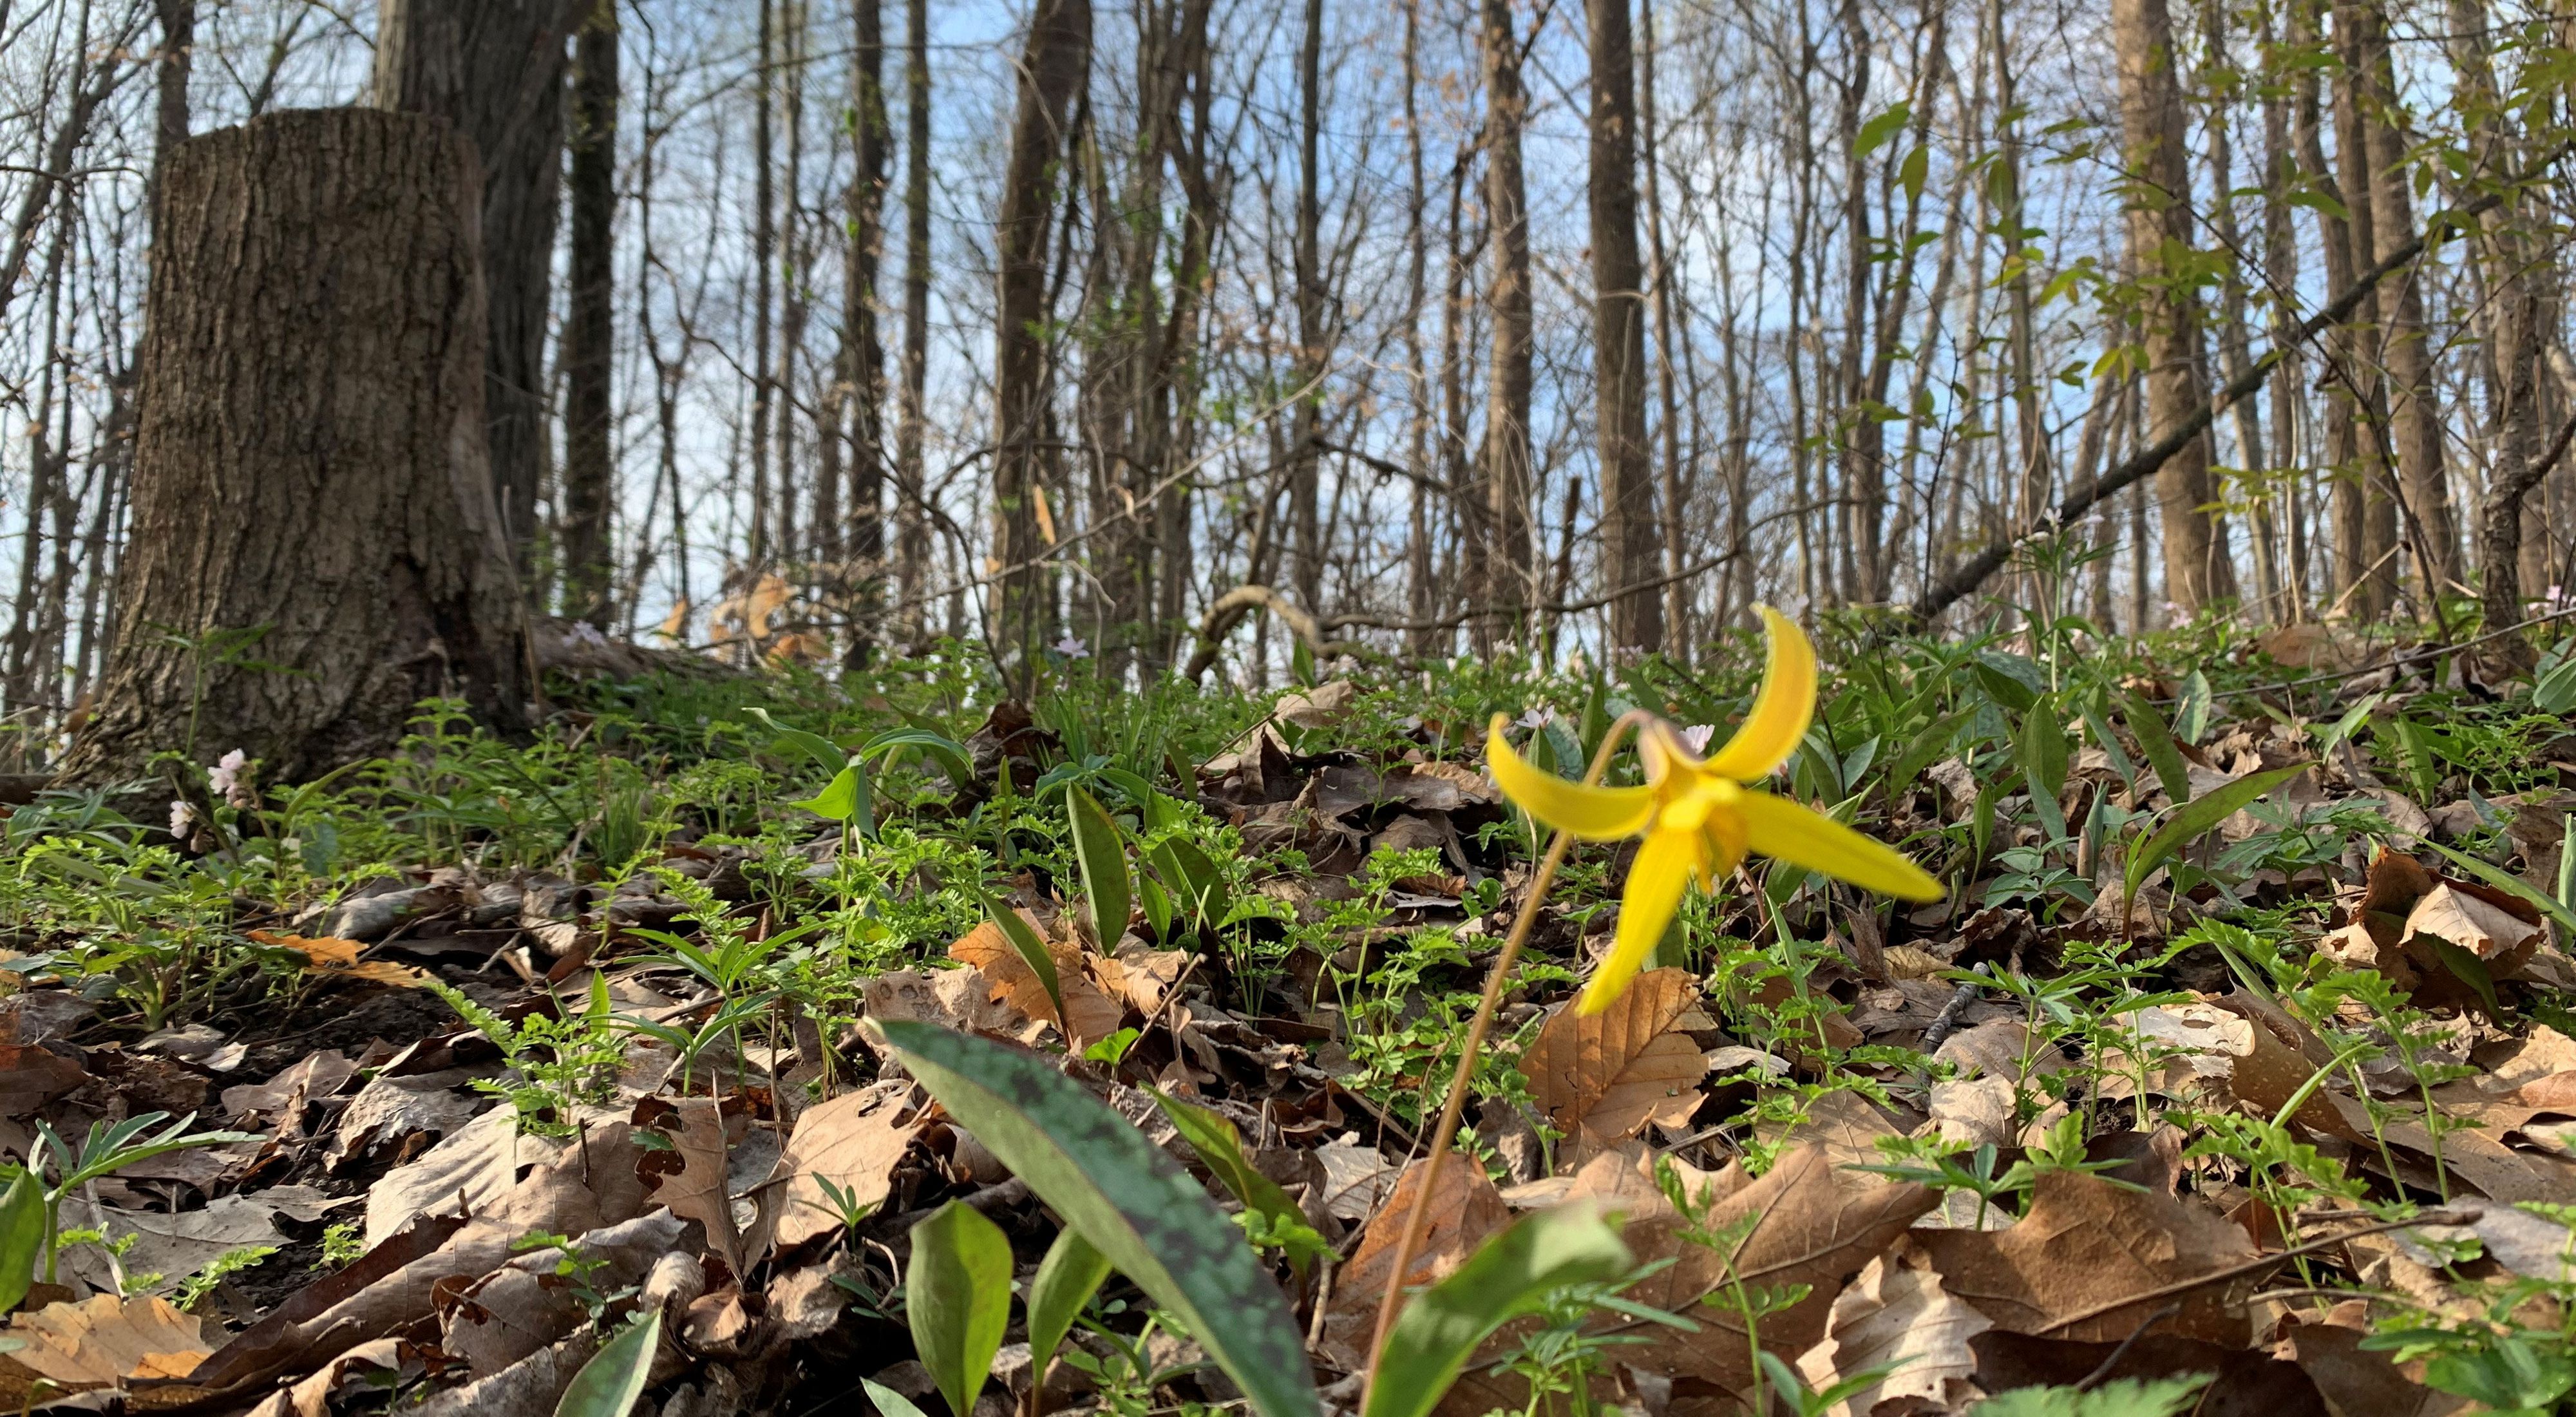 One yellow trout lily blooming on forest floor in springtime.